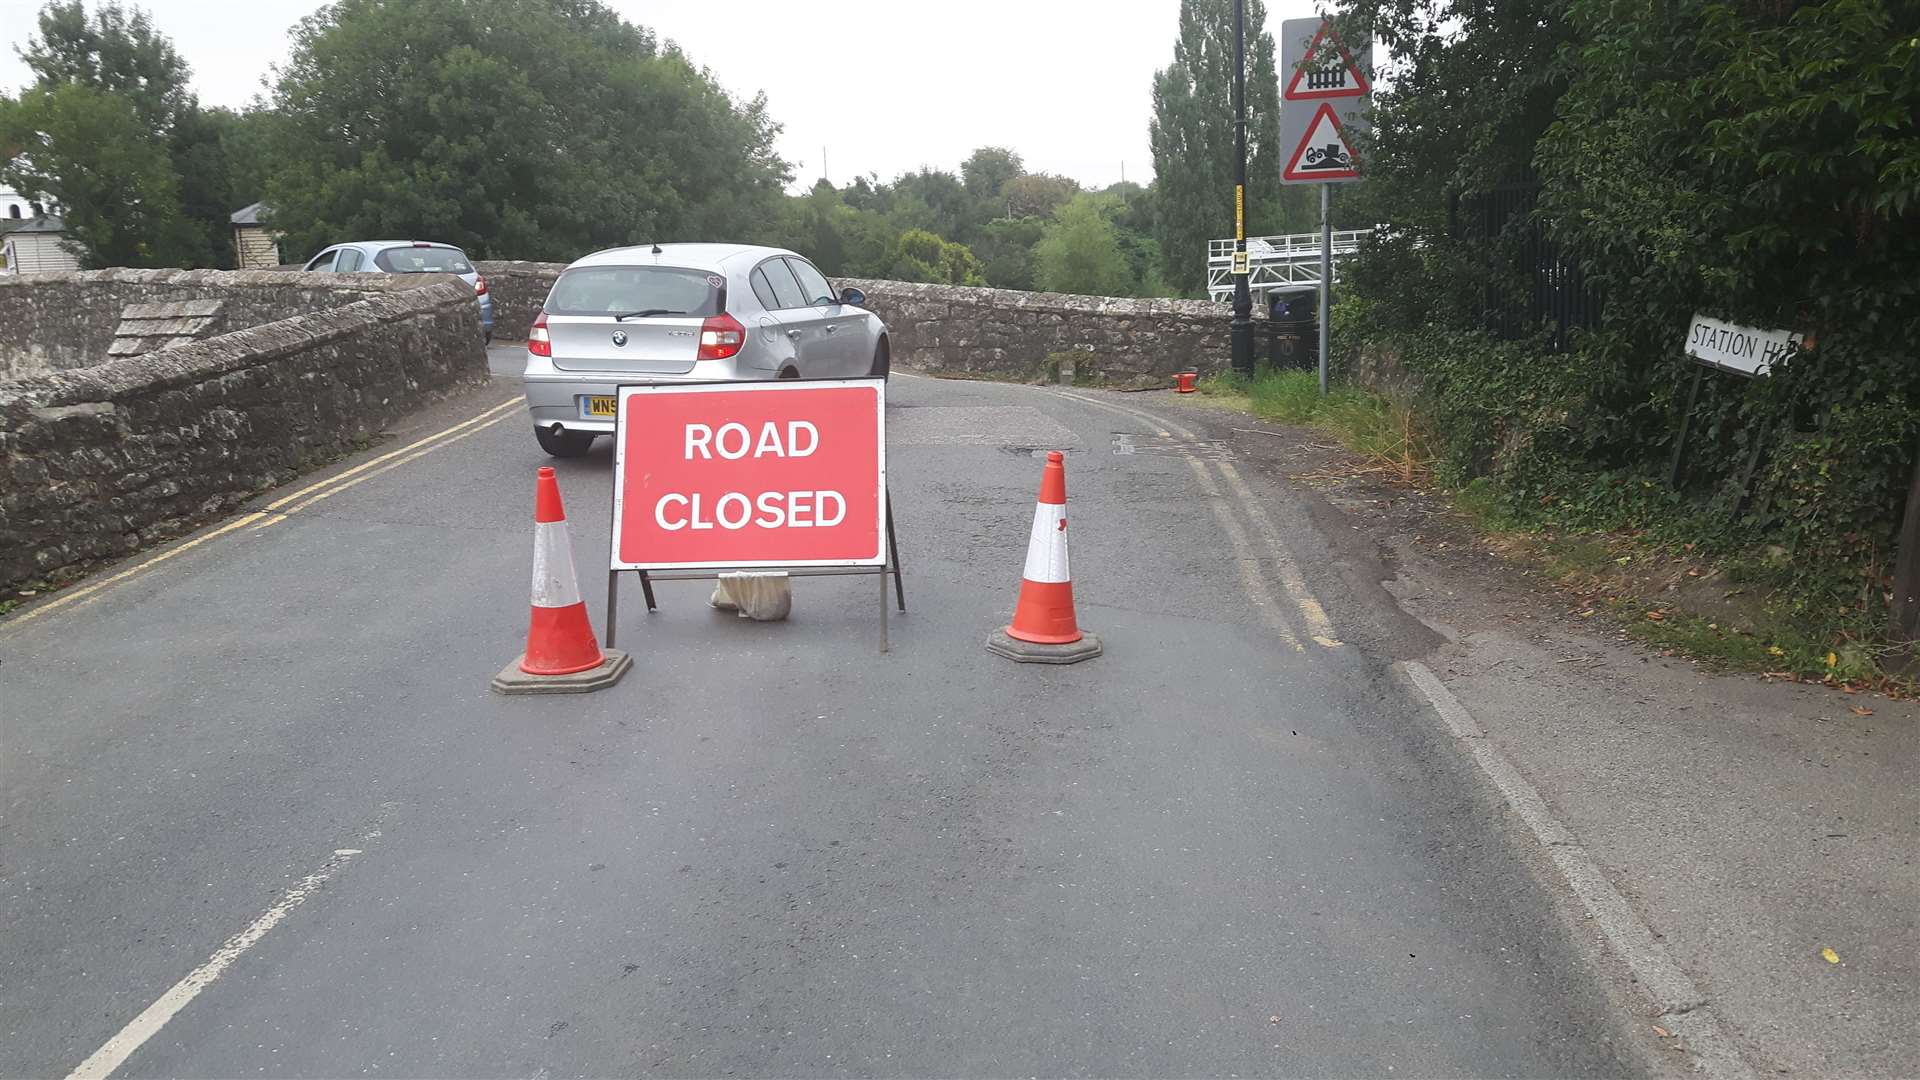 East Farleigh Bridge is set to be closed for repairs